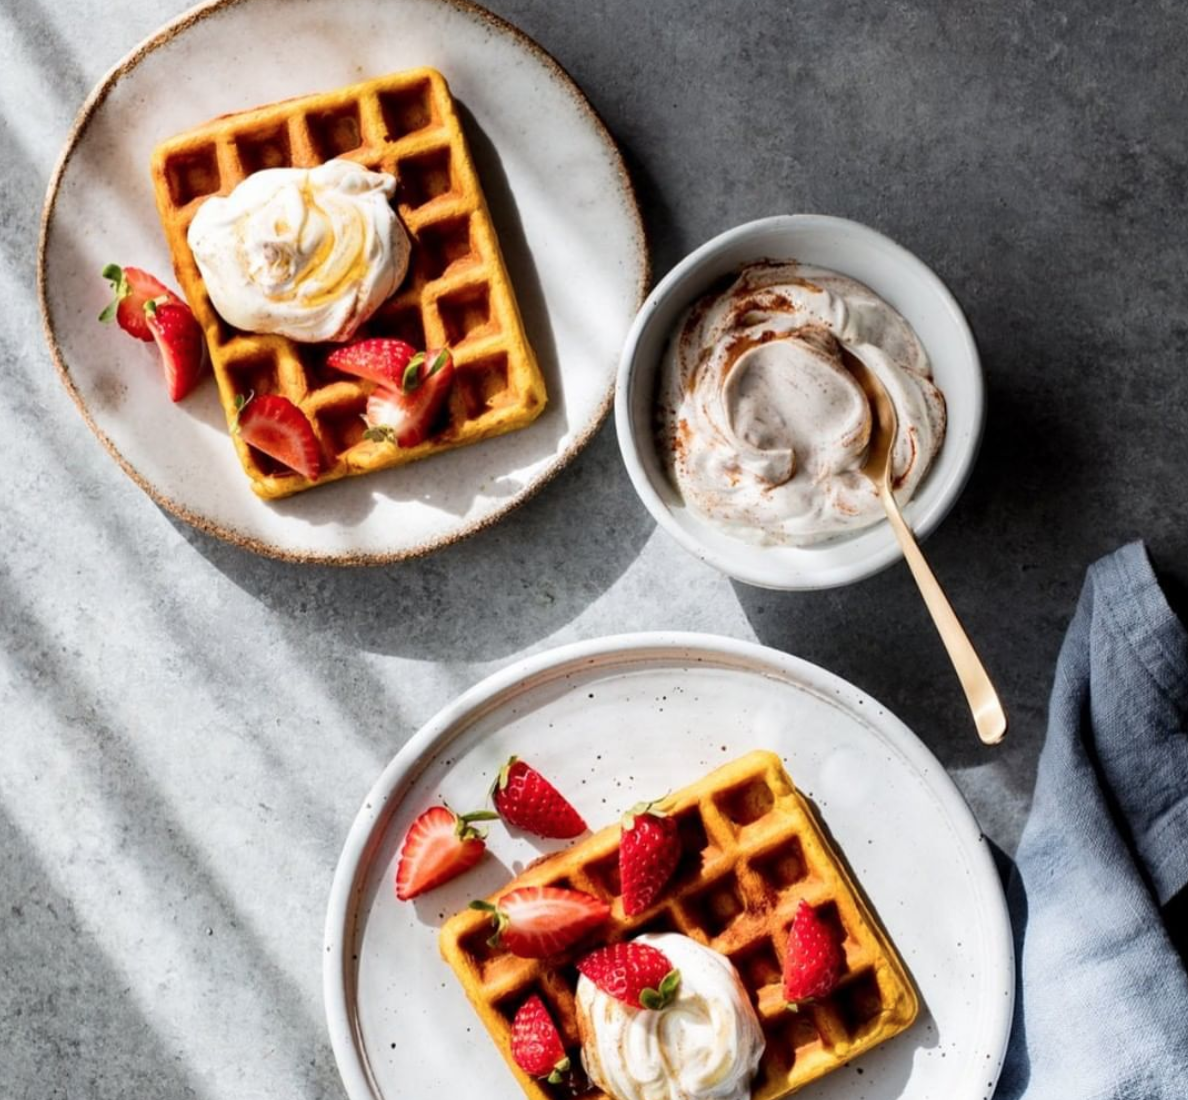 Top your waffles with yogurt! We love these Pumpkin Waffles from Half The Sugar, All The Love by Jennifer Tyler Lee